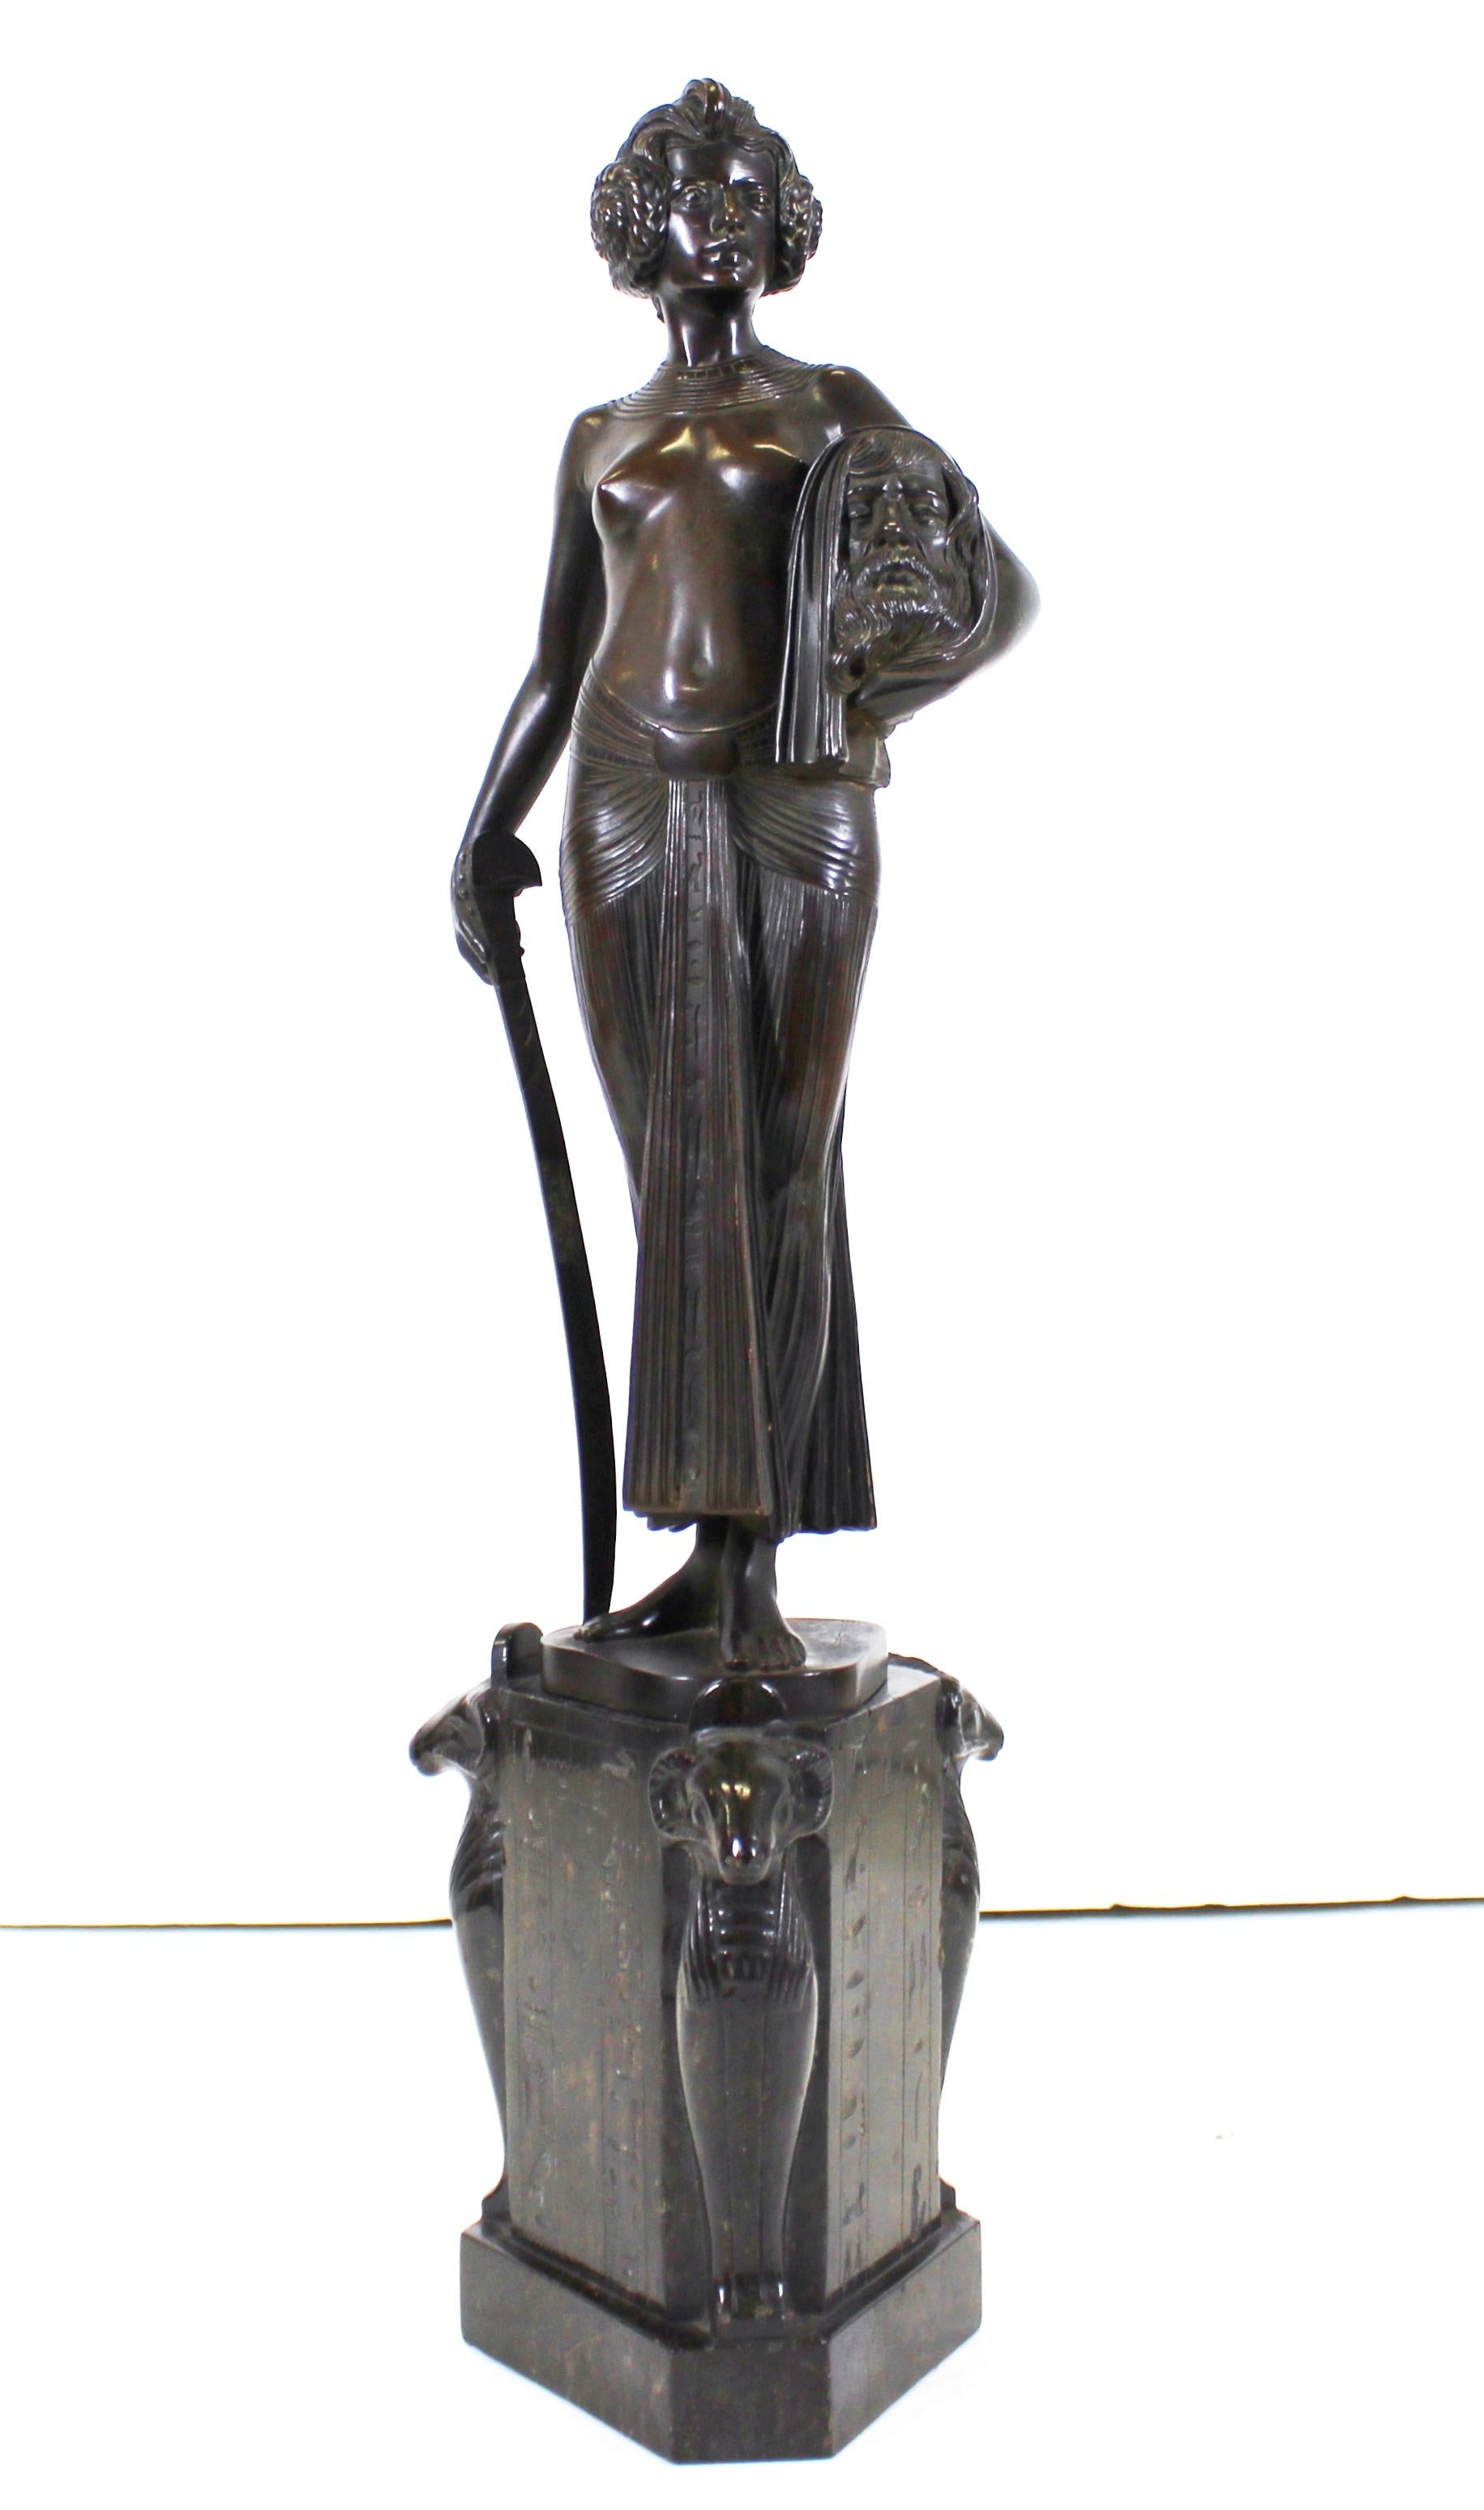 German Jugendstil bronze sculpture of Judith holding her sword and the head of Holofernes, made by German sculptor and medallist Frist Christ (1866-1906). The figure of Judith is standing on a hexagonal Egyptian revival marble base with carved